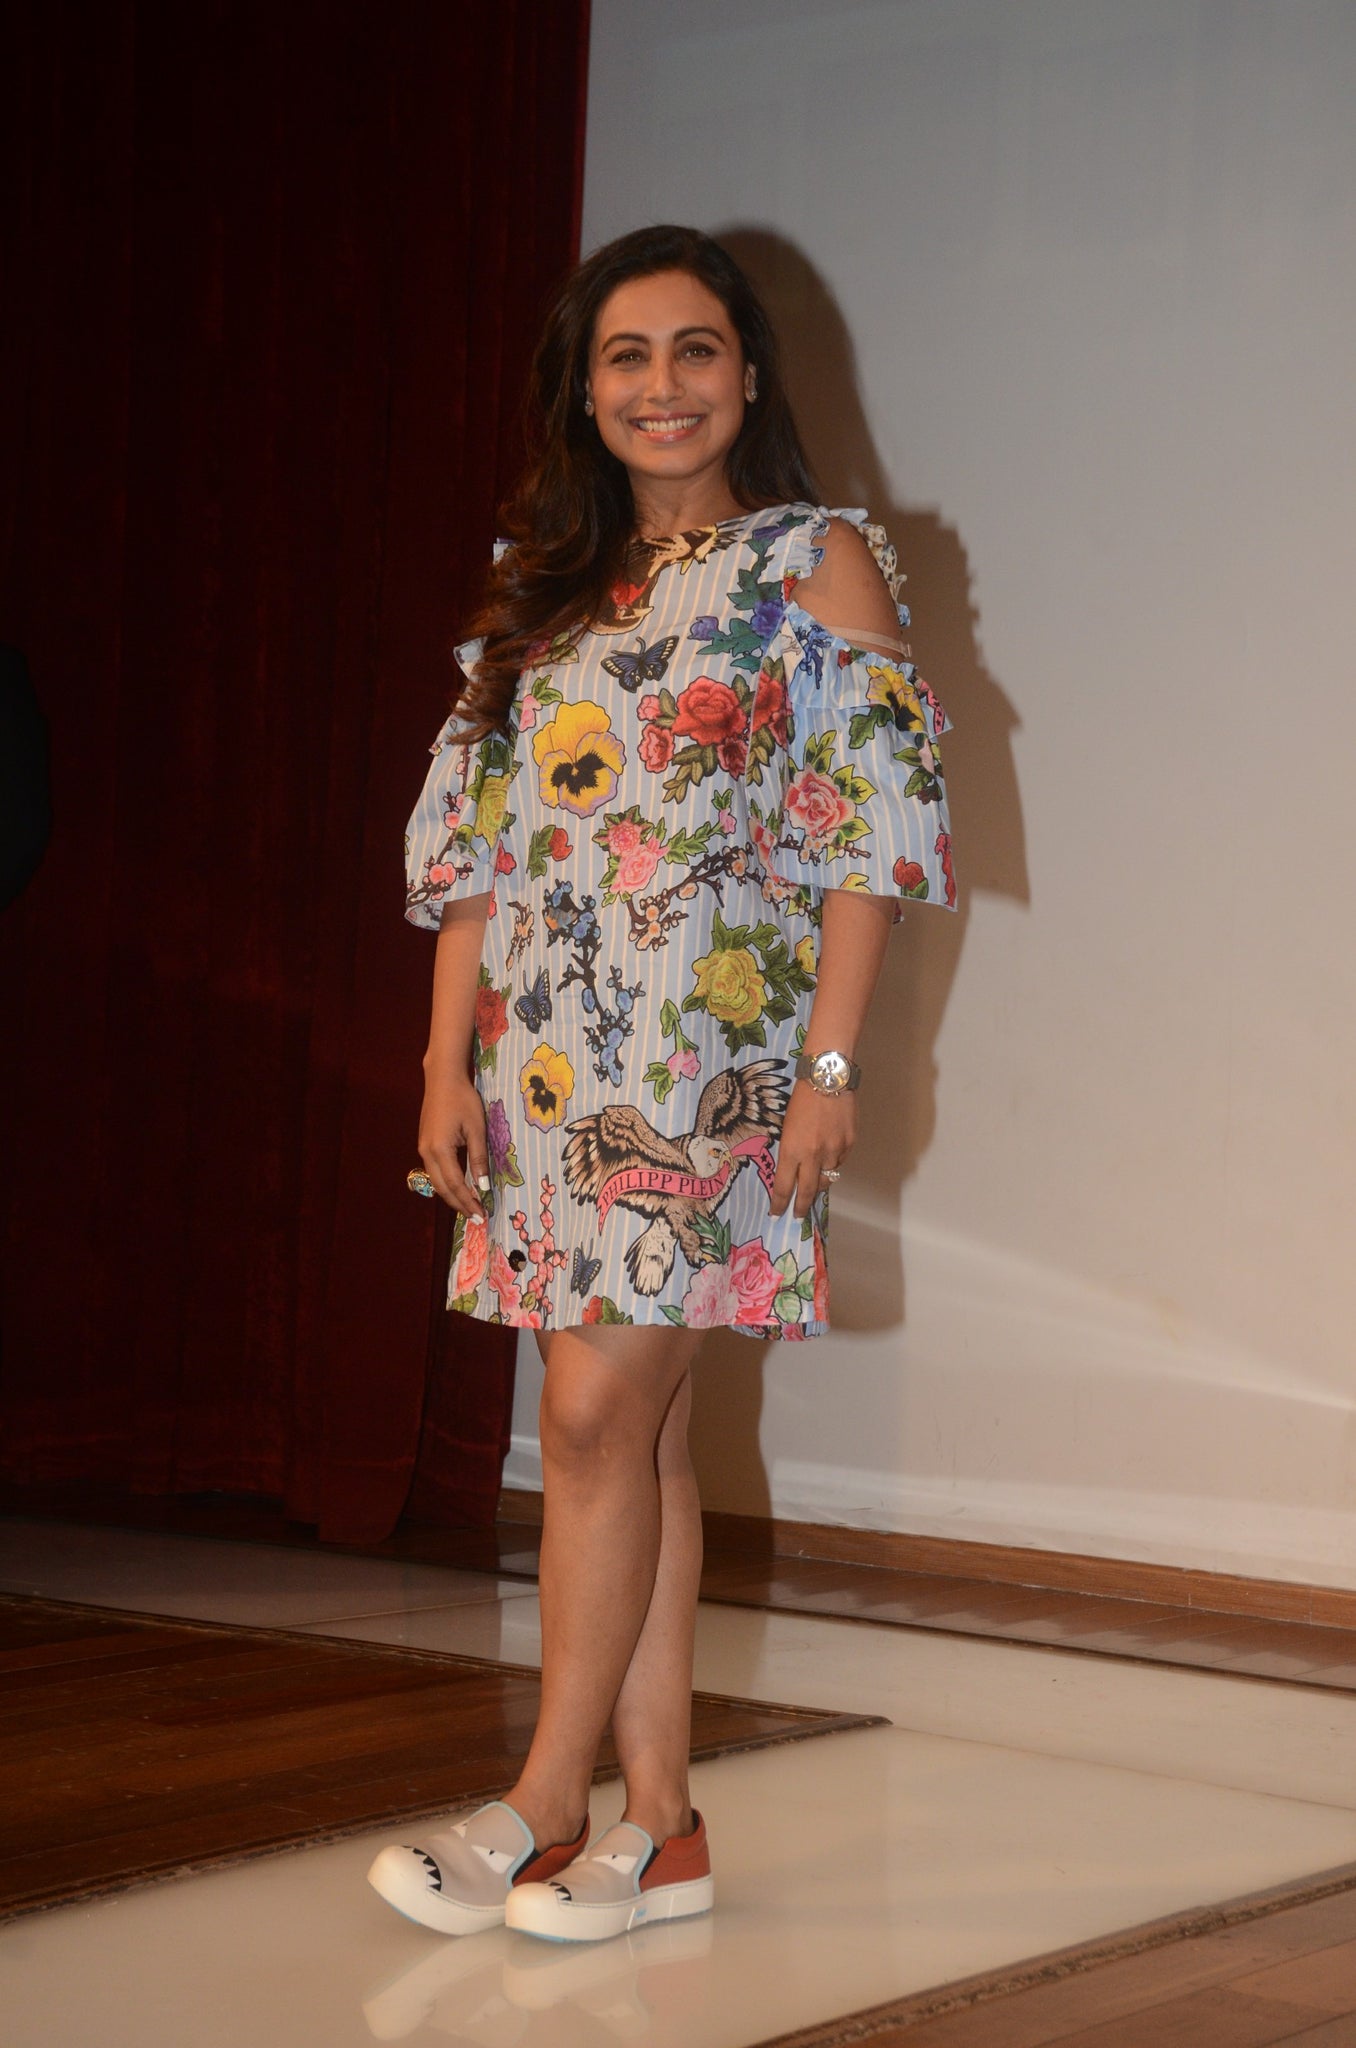 Rani looked pretty in a floral printed cold shoulder midi dress with quirky shows. Quirky loafers simple curls added elegance to the fun look.